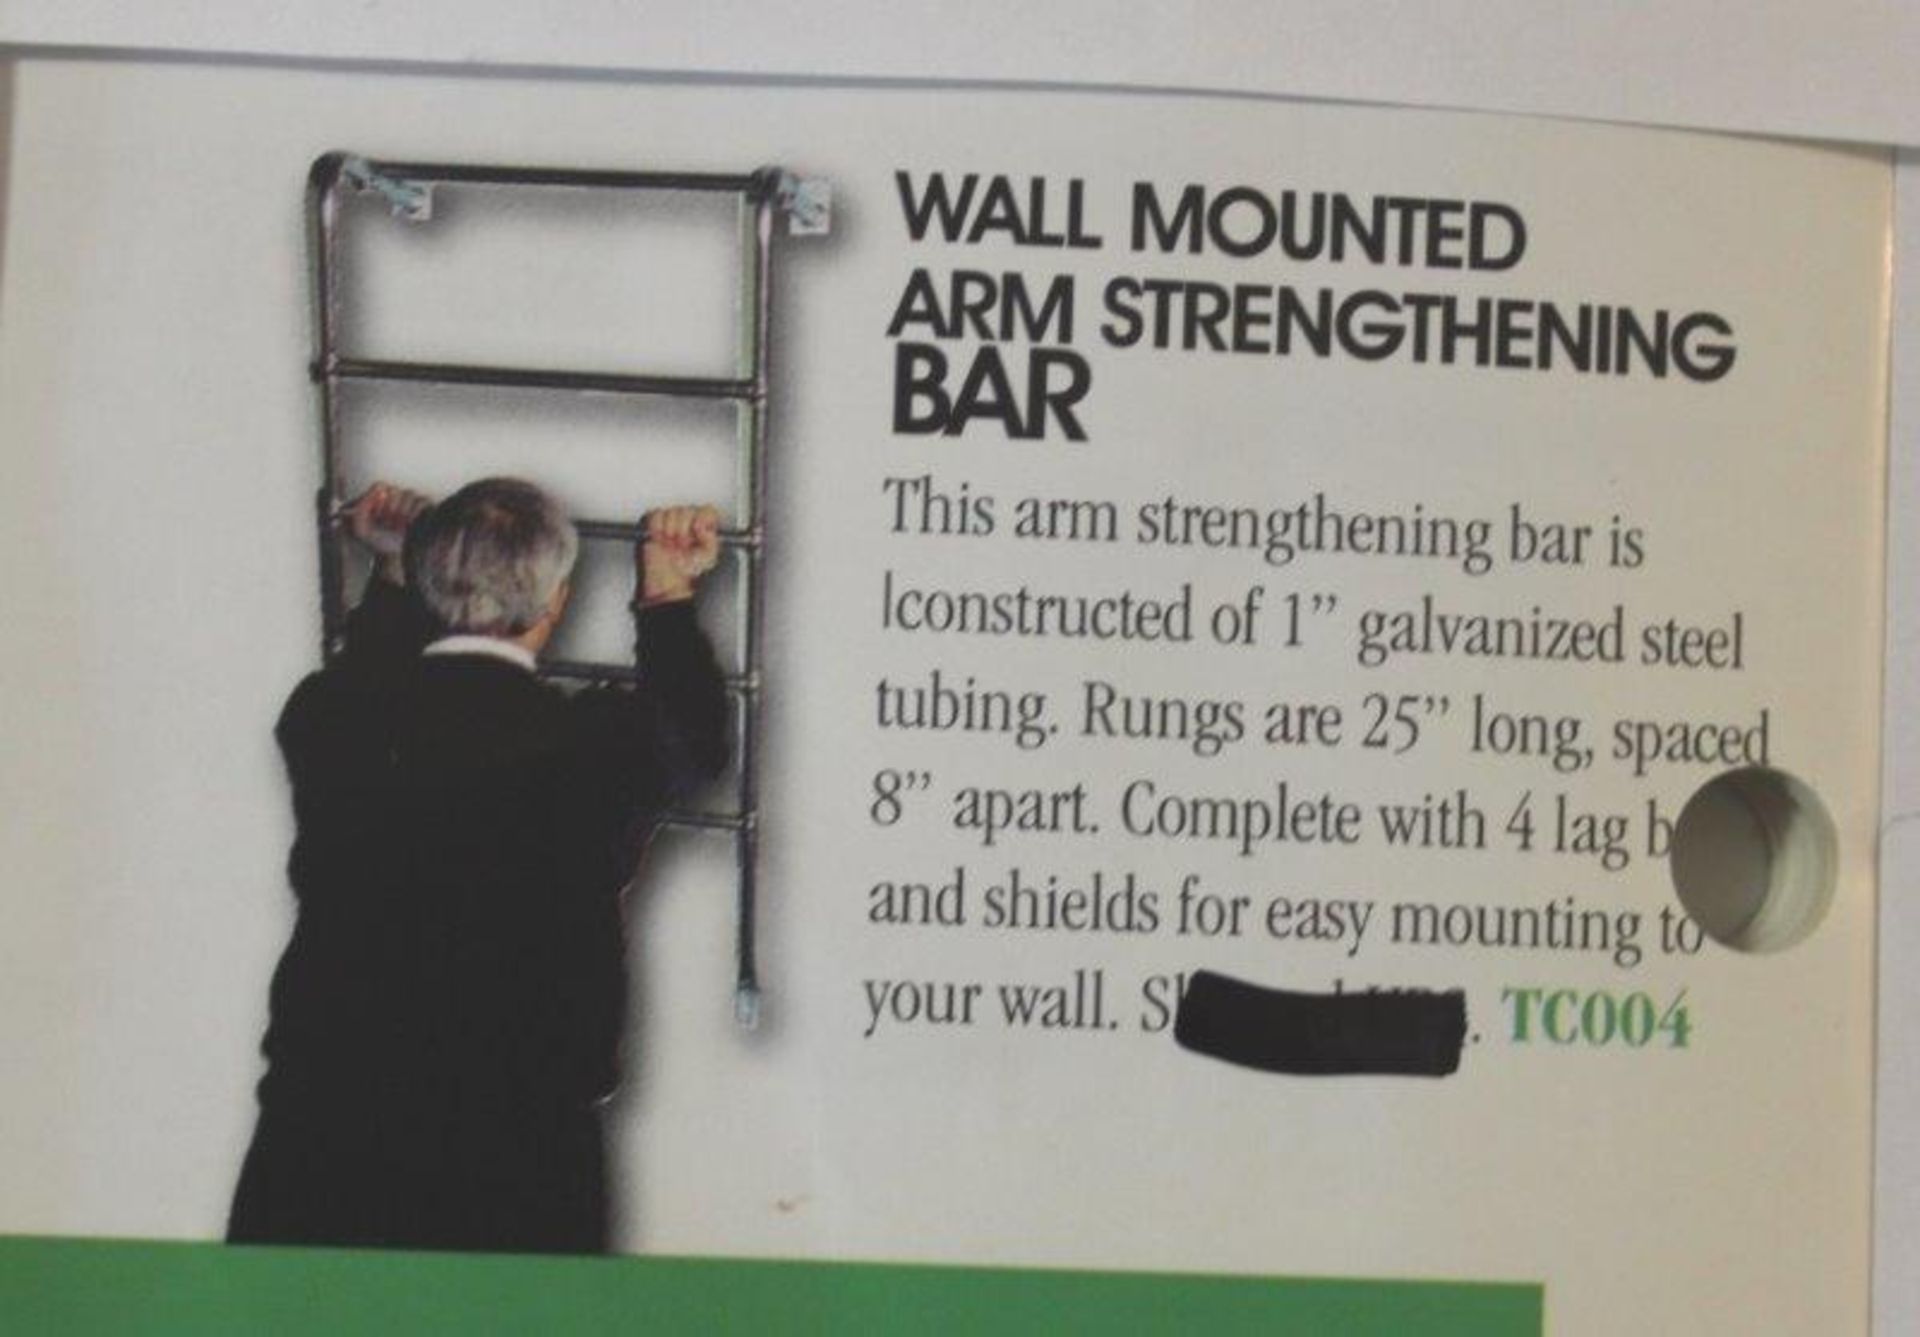 Lot of 6) MTC 004, Wall Mounted Arm Strengthening Bars - Image 2 of 2